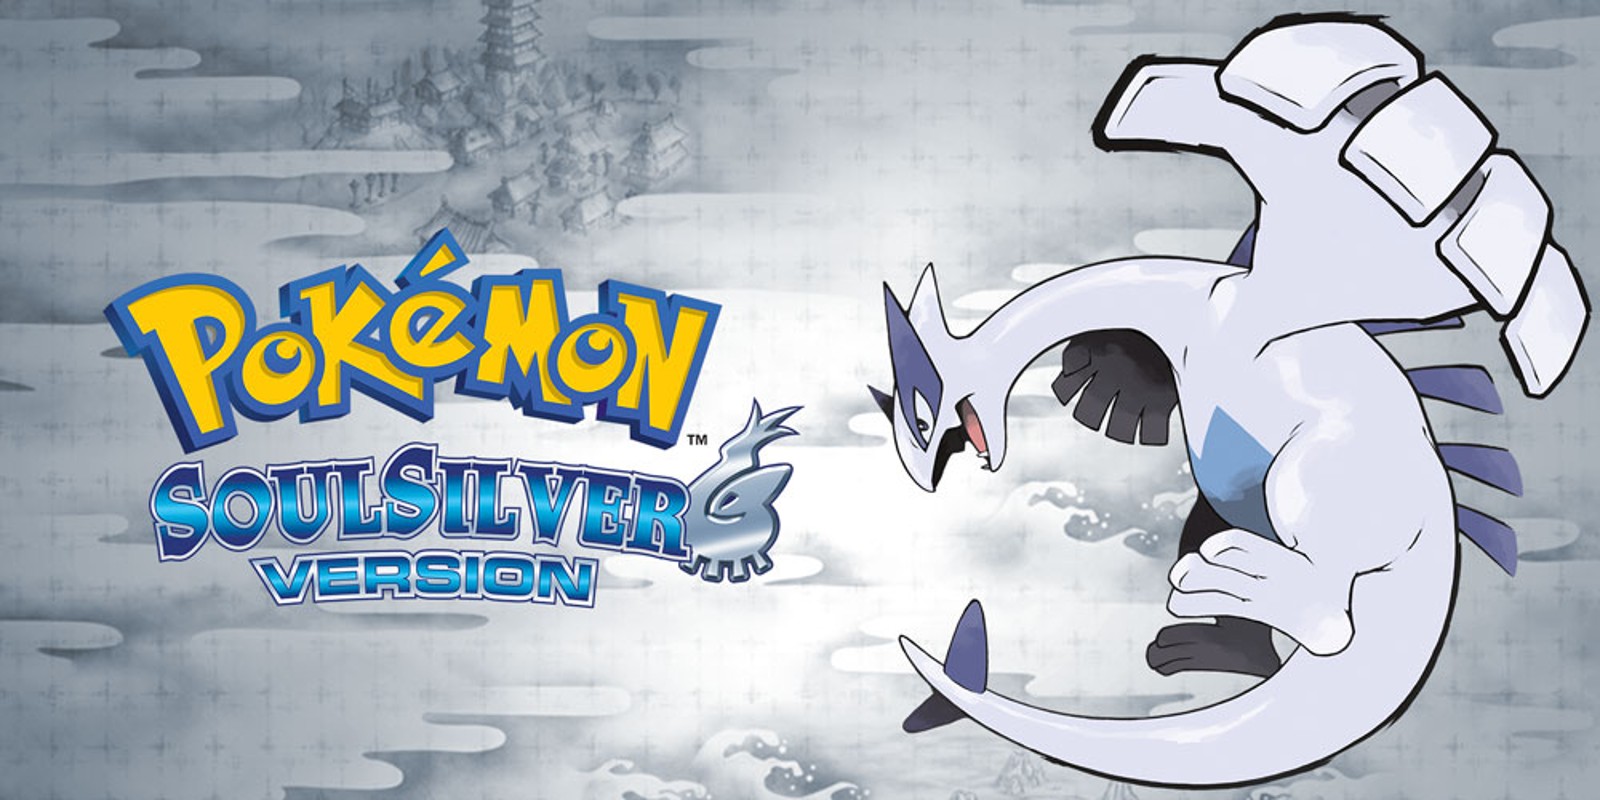 pokemon soul silver gba download for android